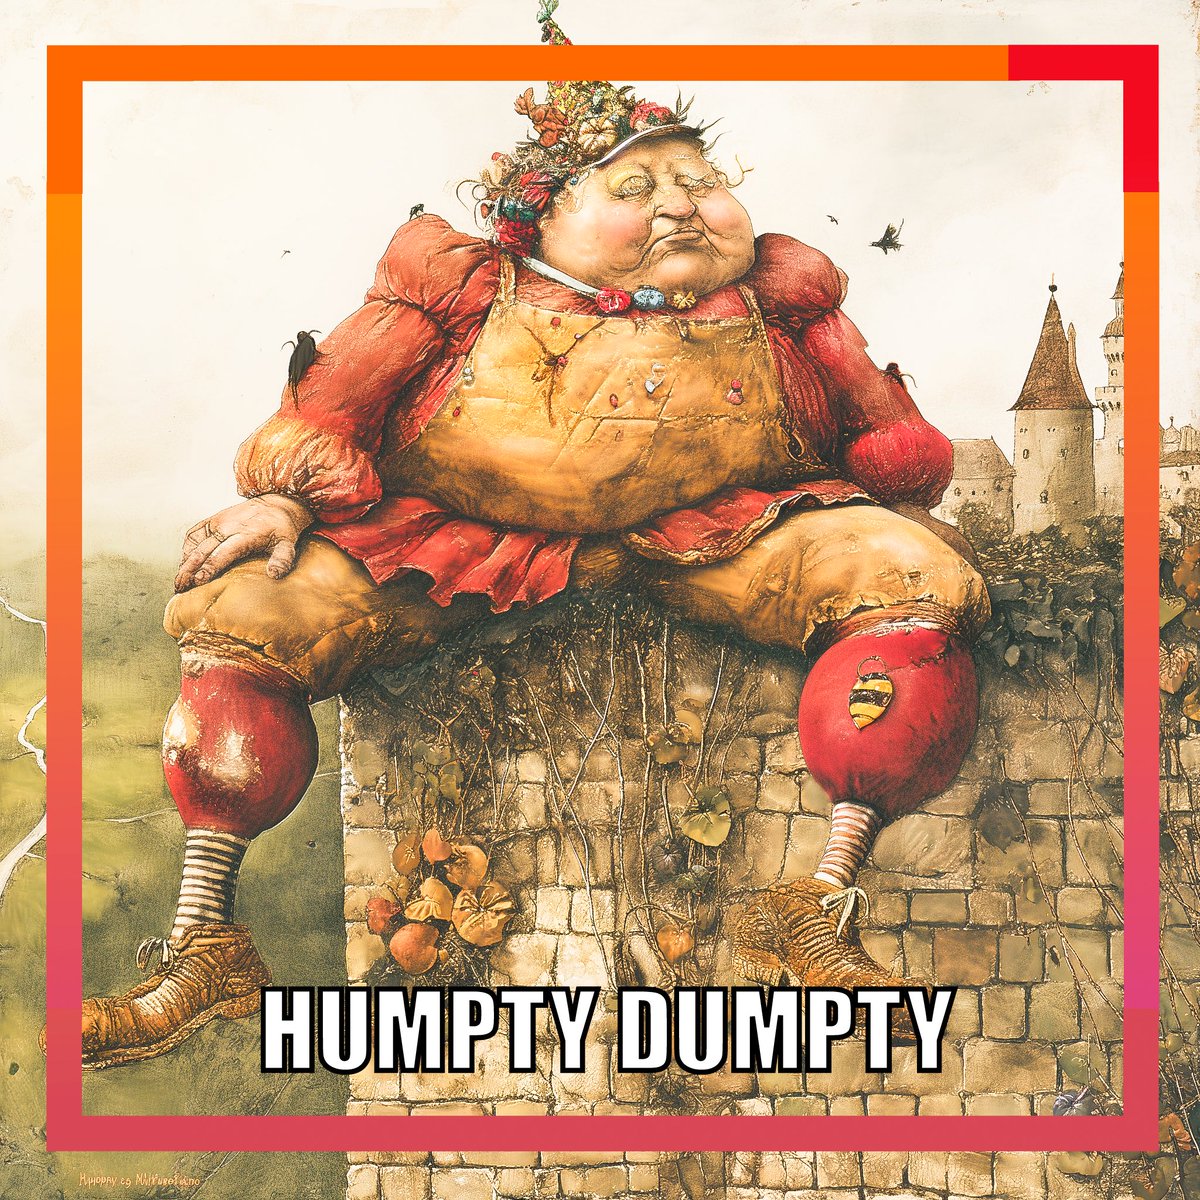 Humpty Dumpty
Sat on a wall.
Now it’s time
For his great fall.

All of his horses
And all of his men
Won’t put Dumpty
Together again.

#NotTheKingOfEngland
#SomeplaceCloserToHome